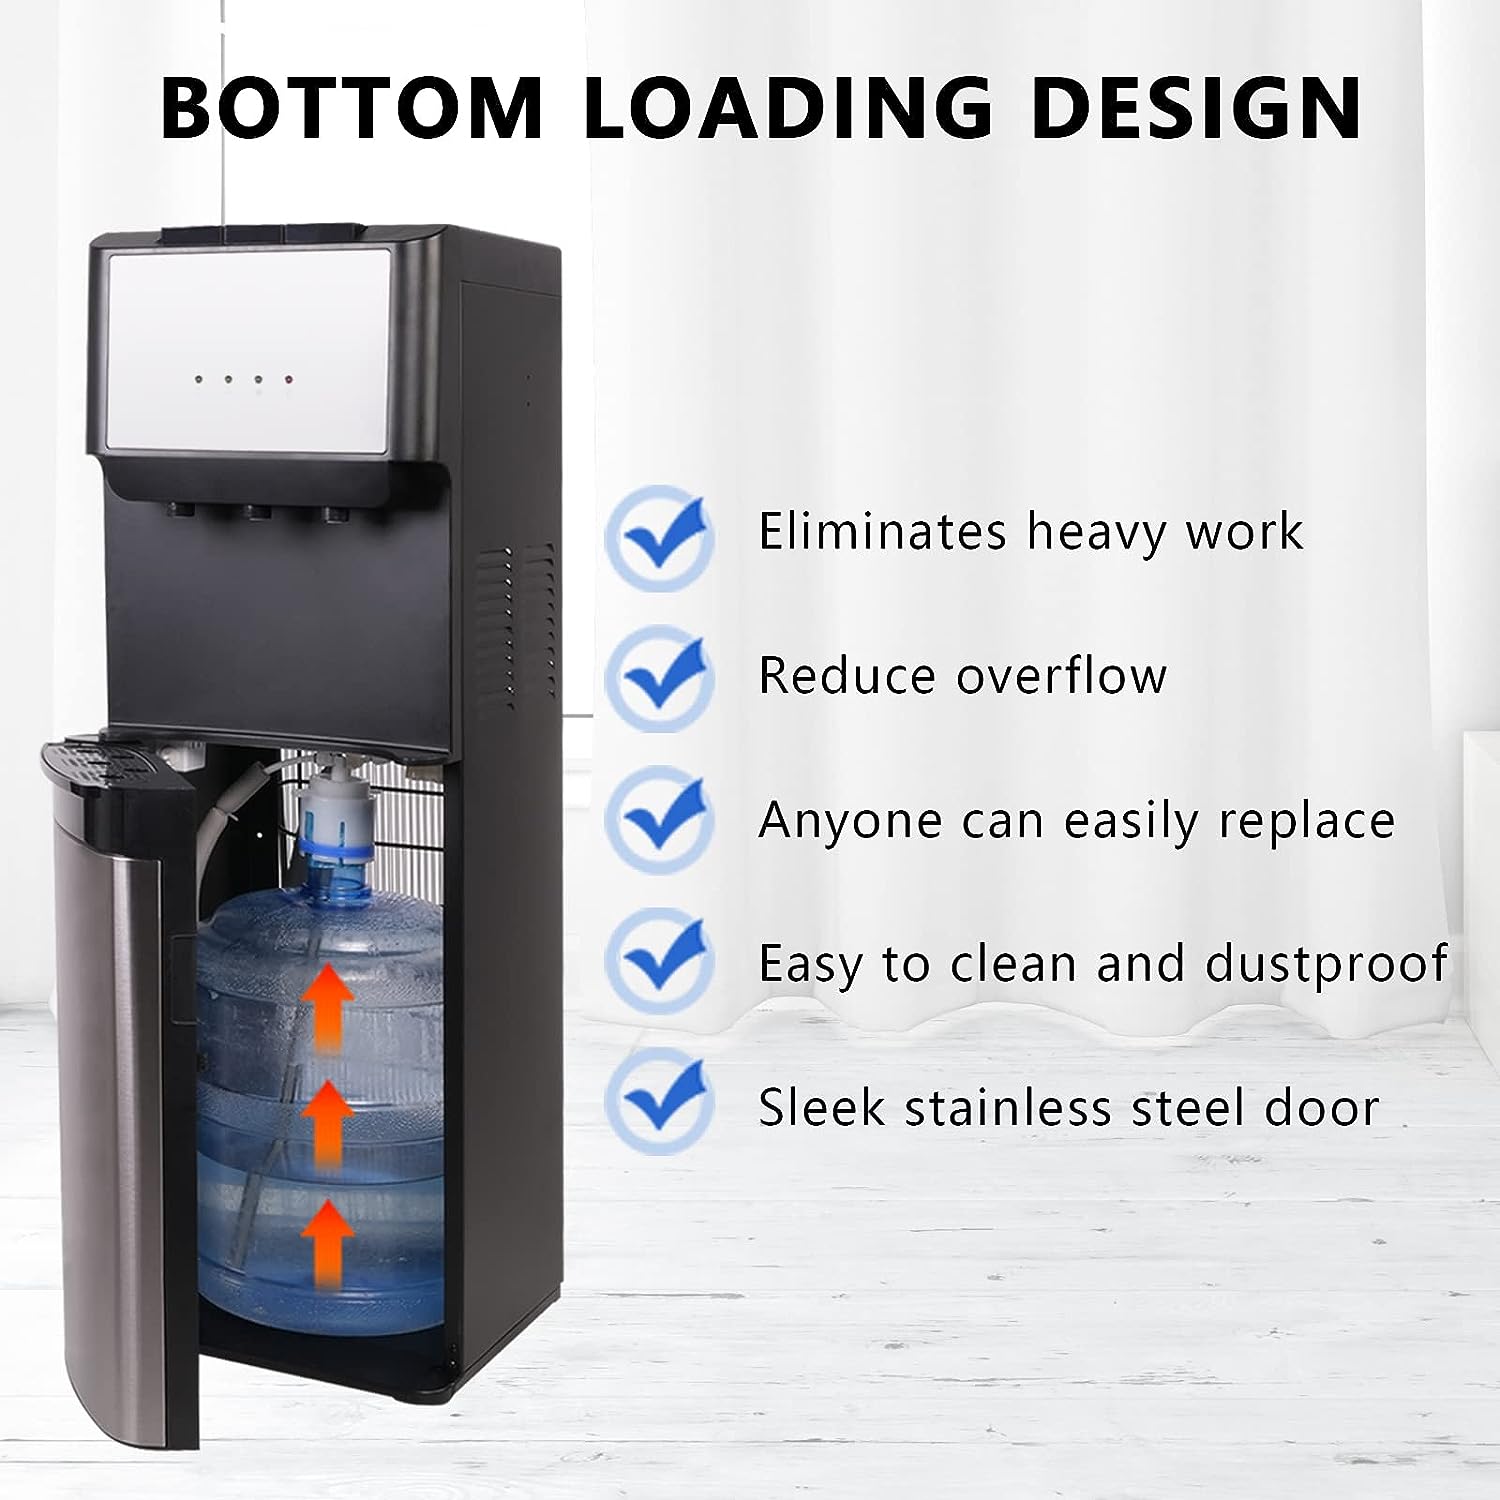 How Does a Hot Water Dispenser Work?